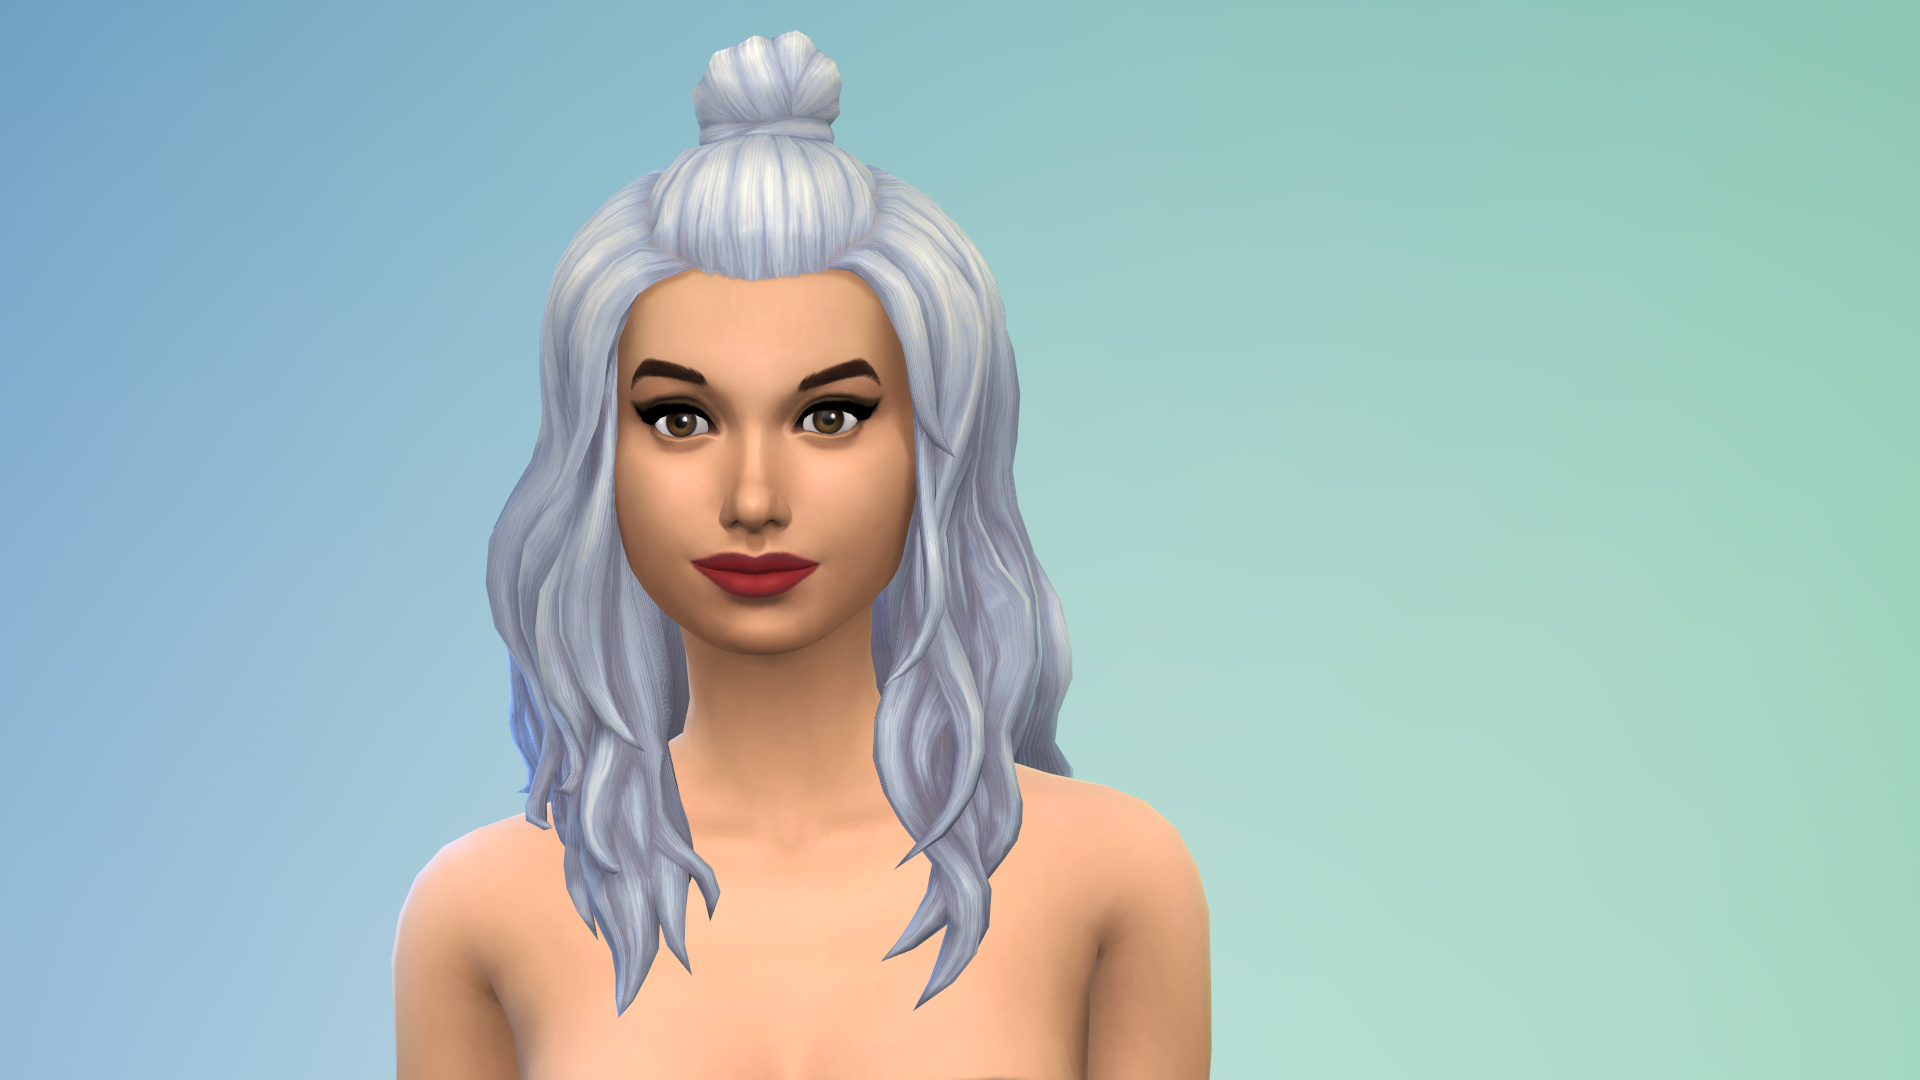 how to a sim in sims 4